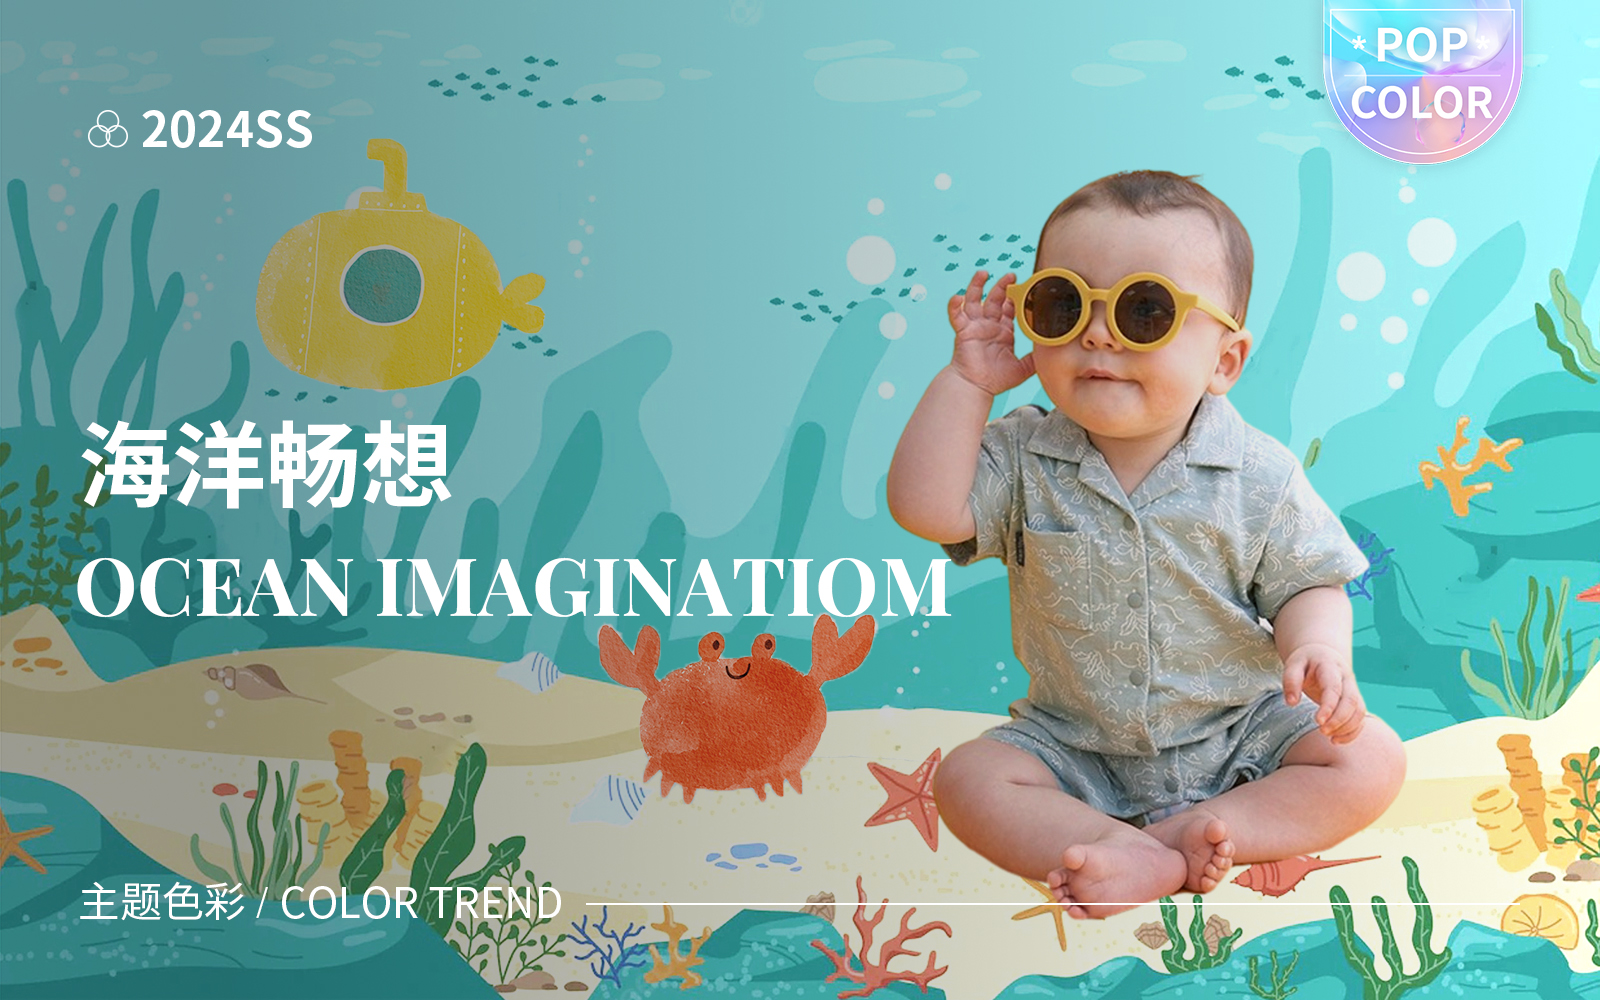 Ocean Imagination -- The Thematic Color Trend for Infantswear